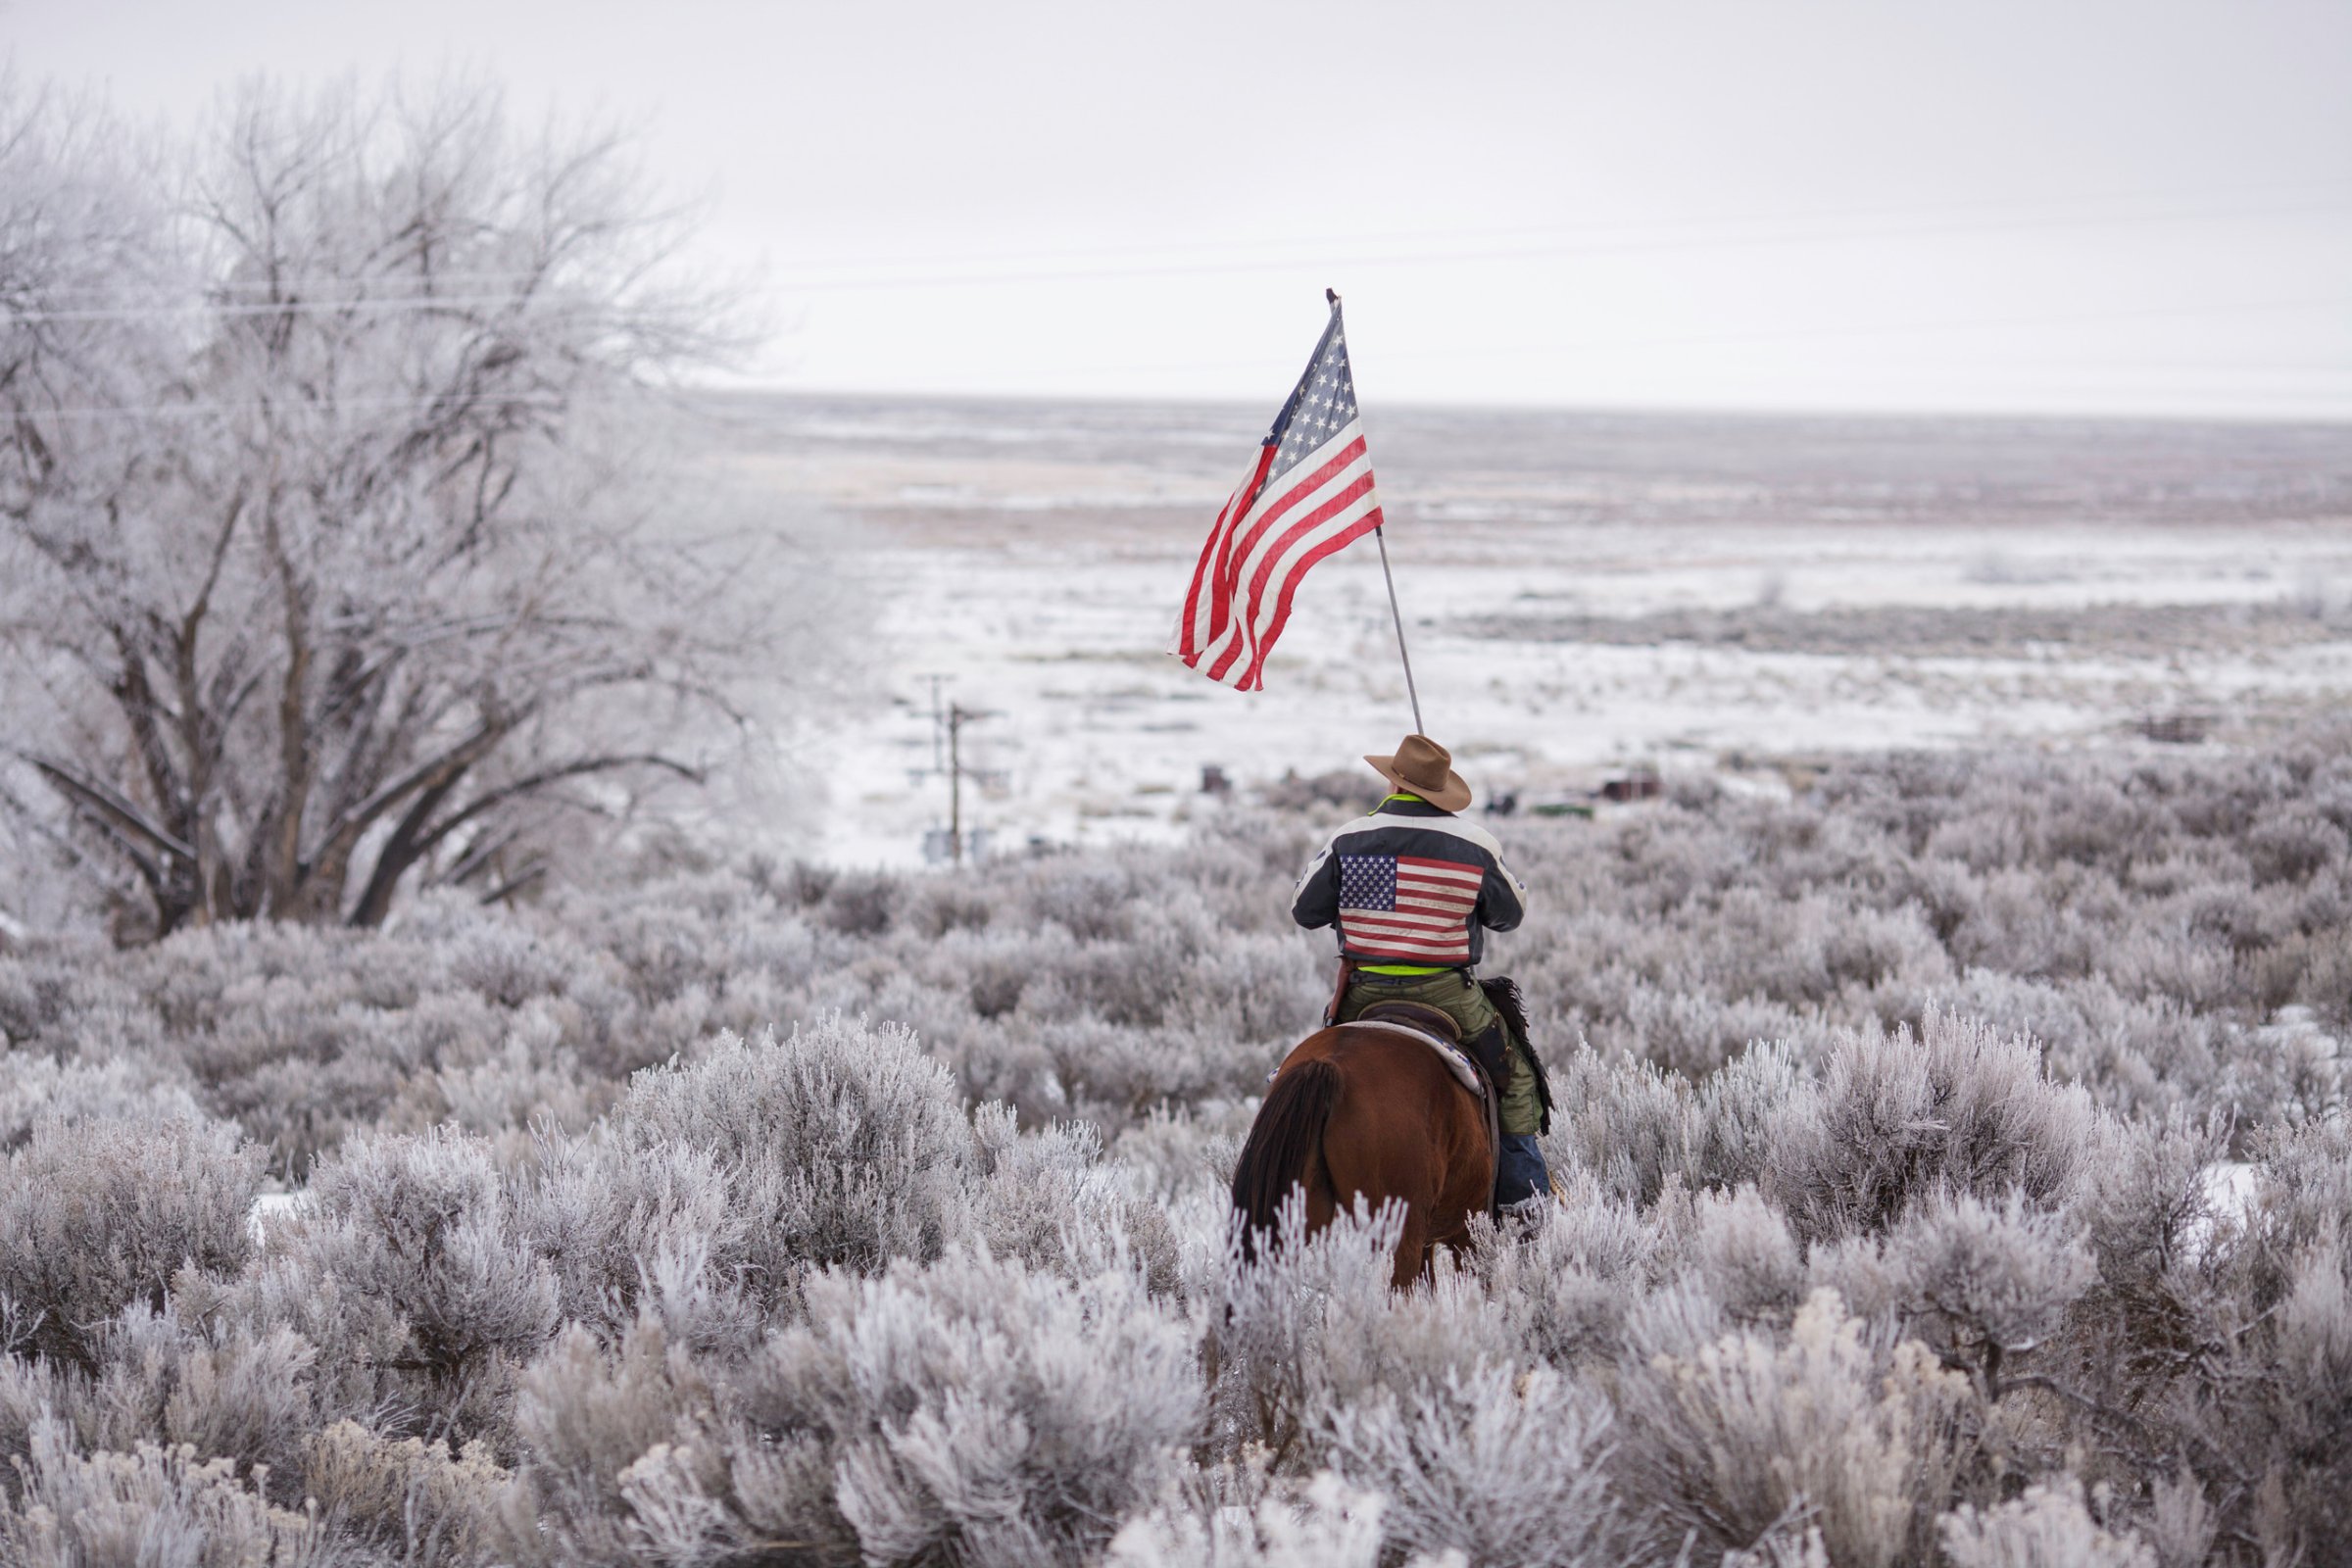 TOPSHOT - Duane Ehmer rides his horse Hellboy at the occupied Malheur National Wildlife Refuge on the sixth day of the occupation of the federal building in Burns, Oregon on January 7, 2016. The leader of a small group of armed activists who have occupied a remote wildlife refuge in Oregon hinted on Wednesday that the standoff may be nearing its end. / AFP / ROB KERR (Photo credit should read ROB KERR/AFP/Getty Images)